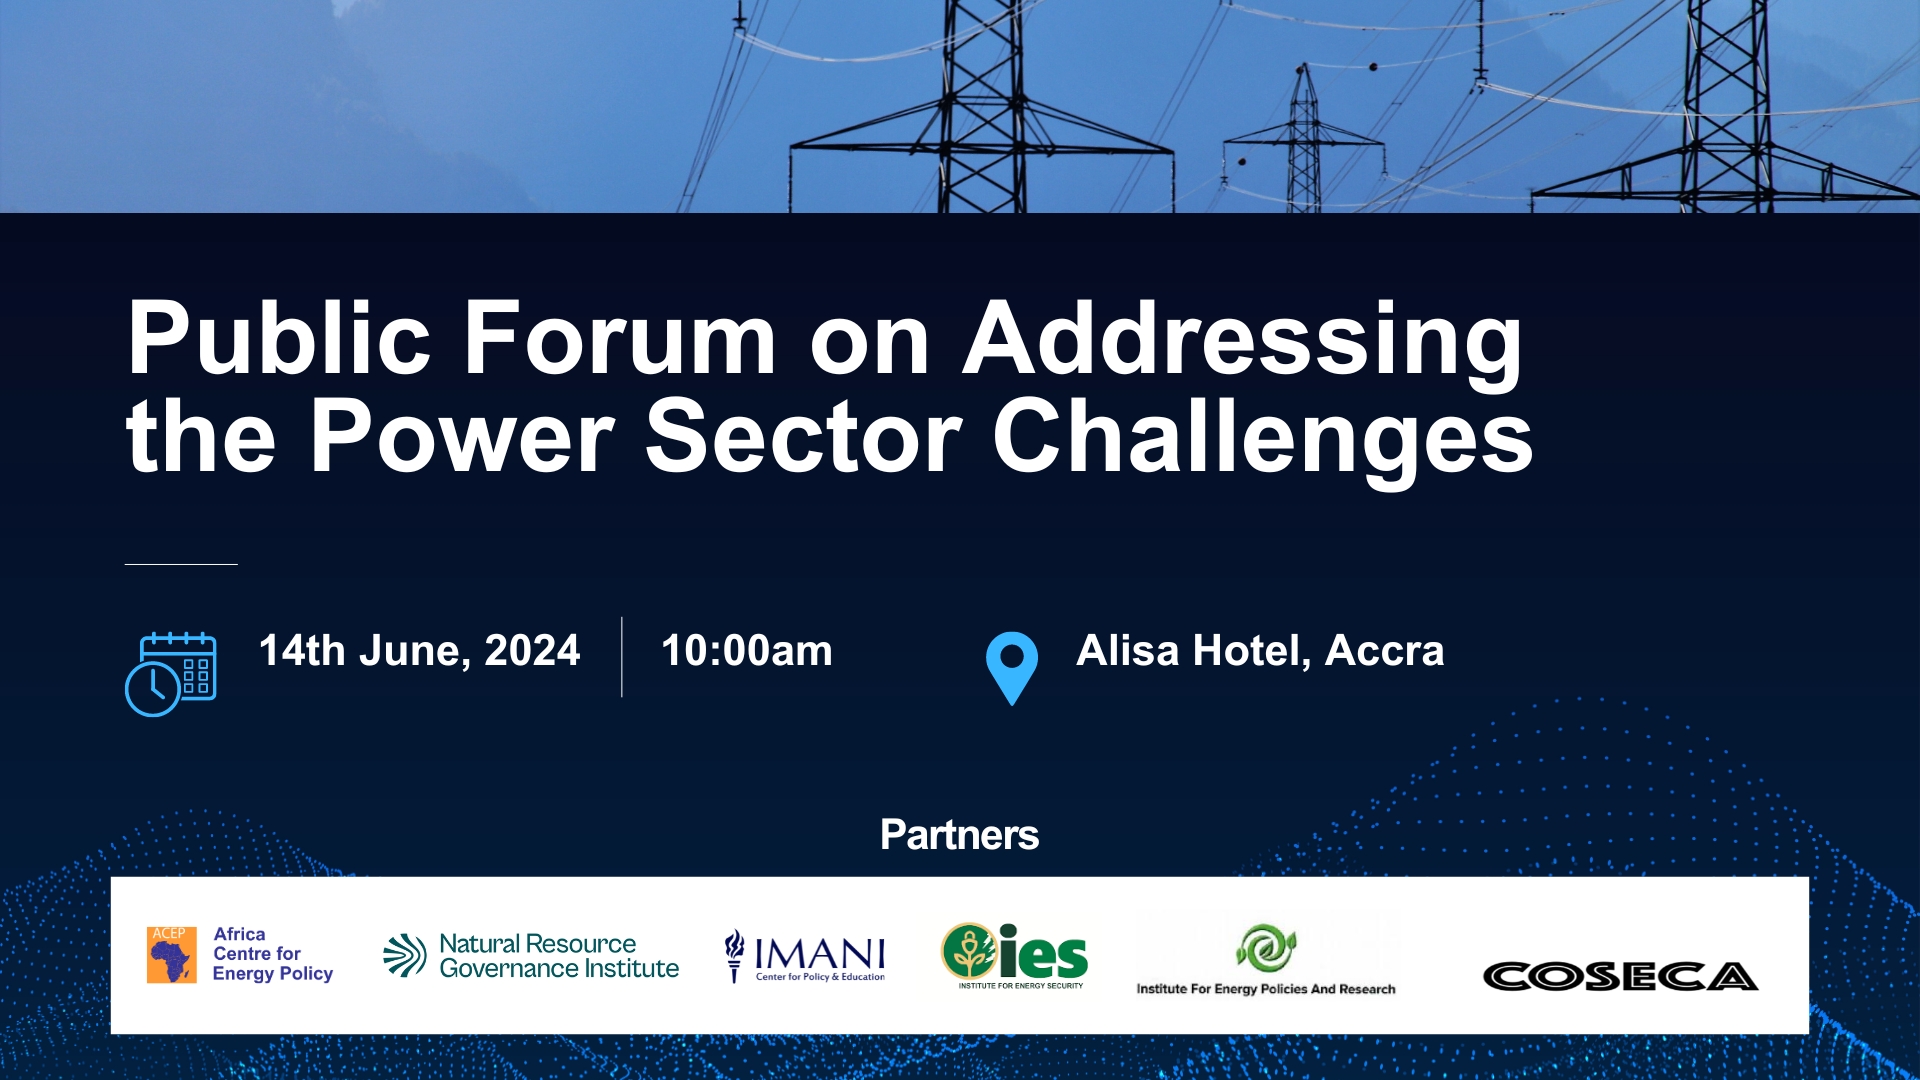 Public Forum on Addressing the Power Sector Challenges